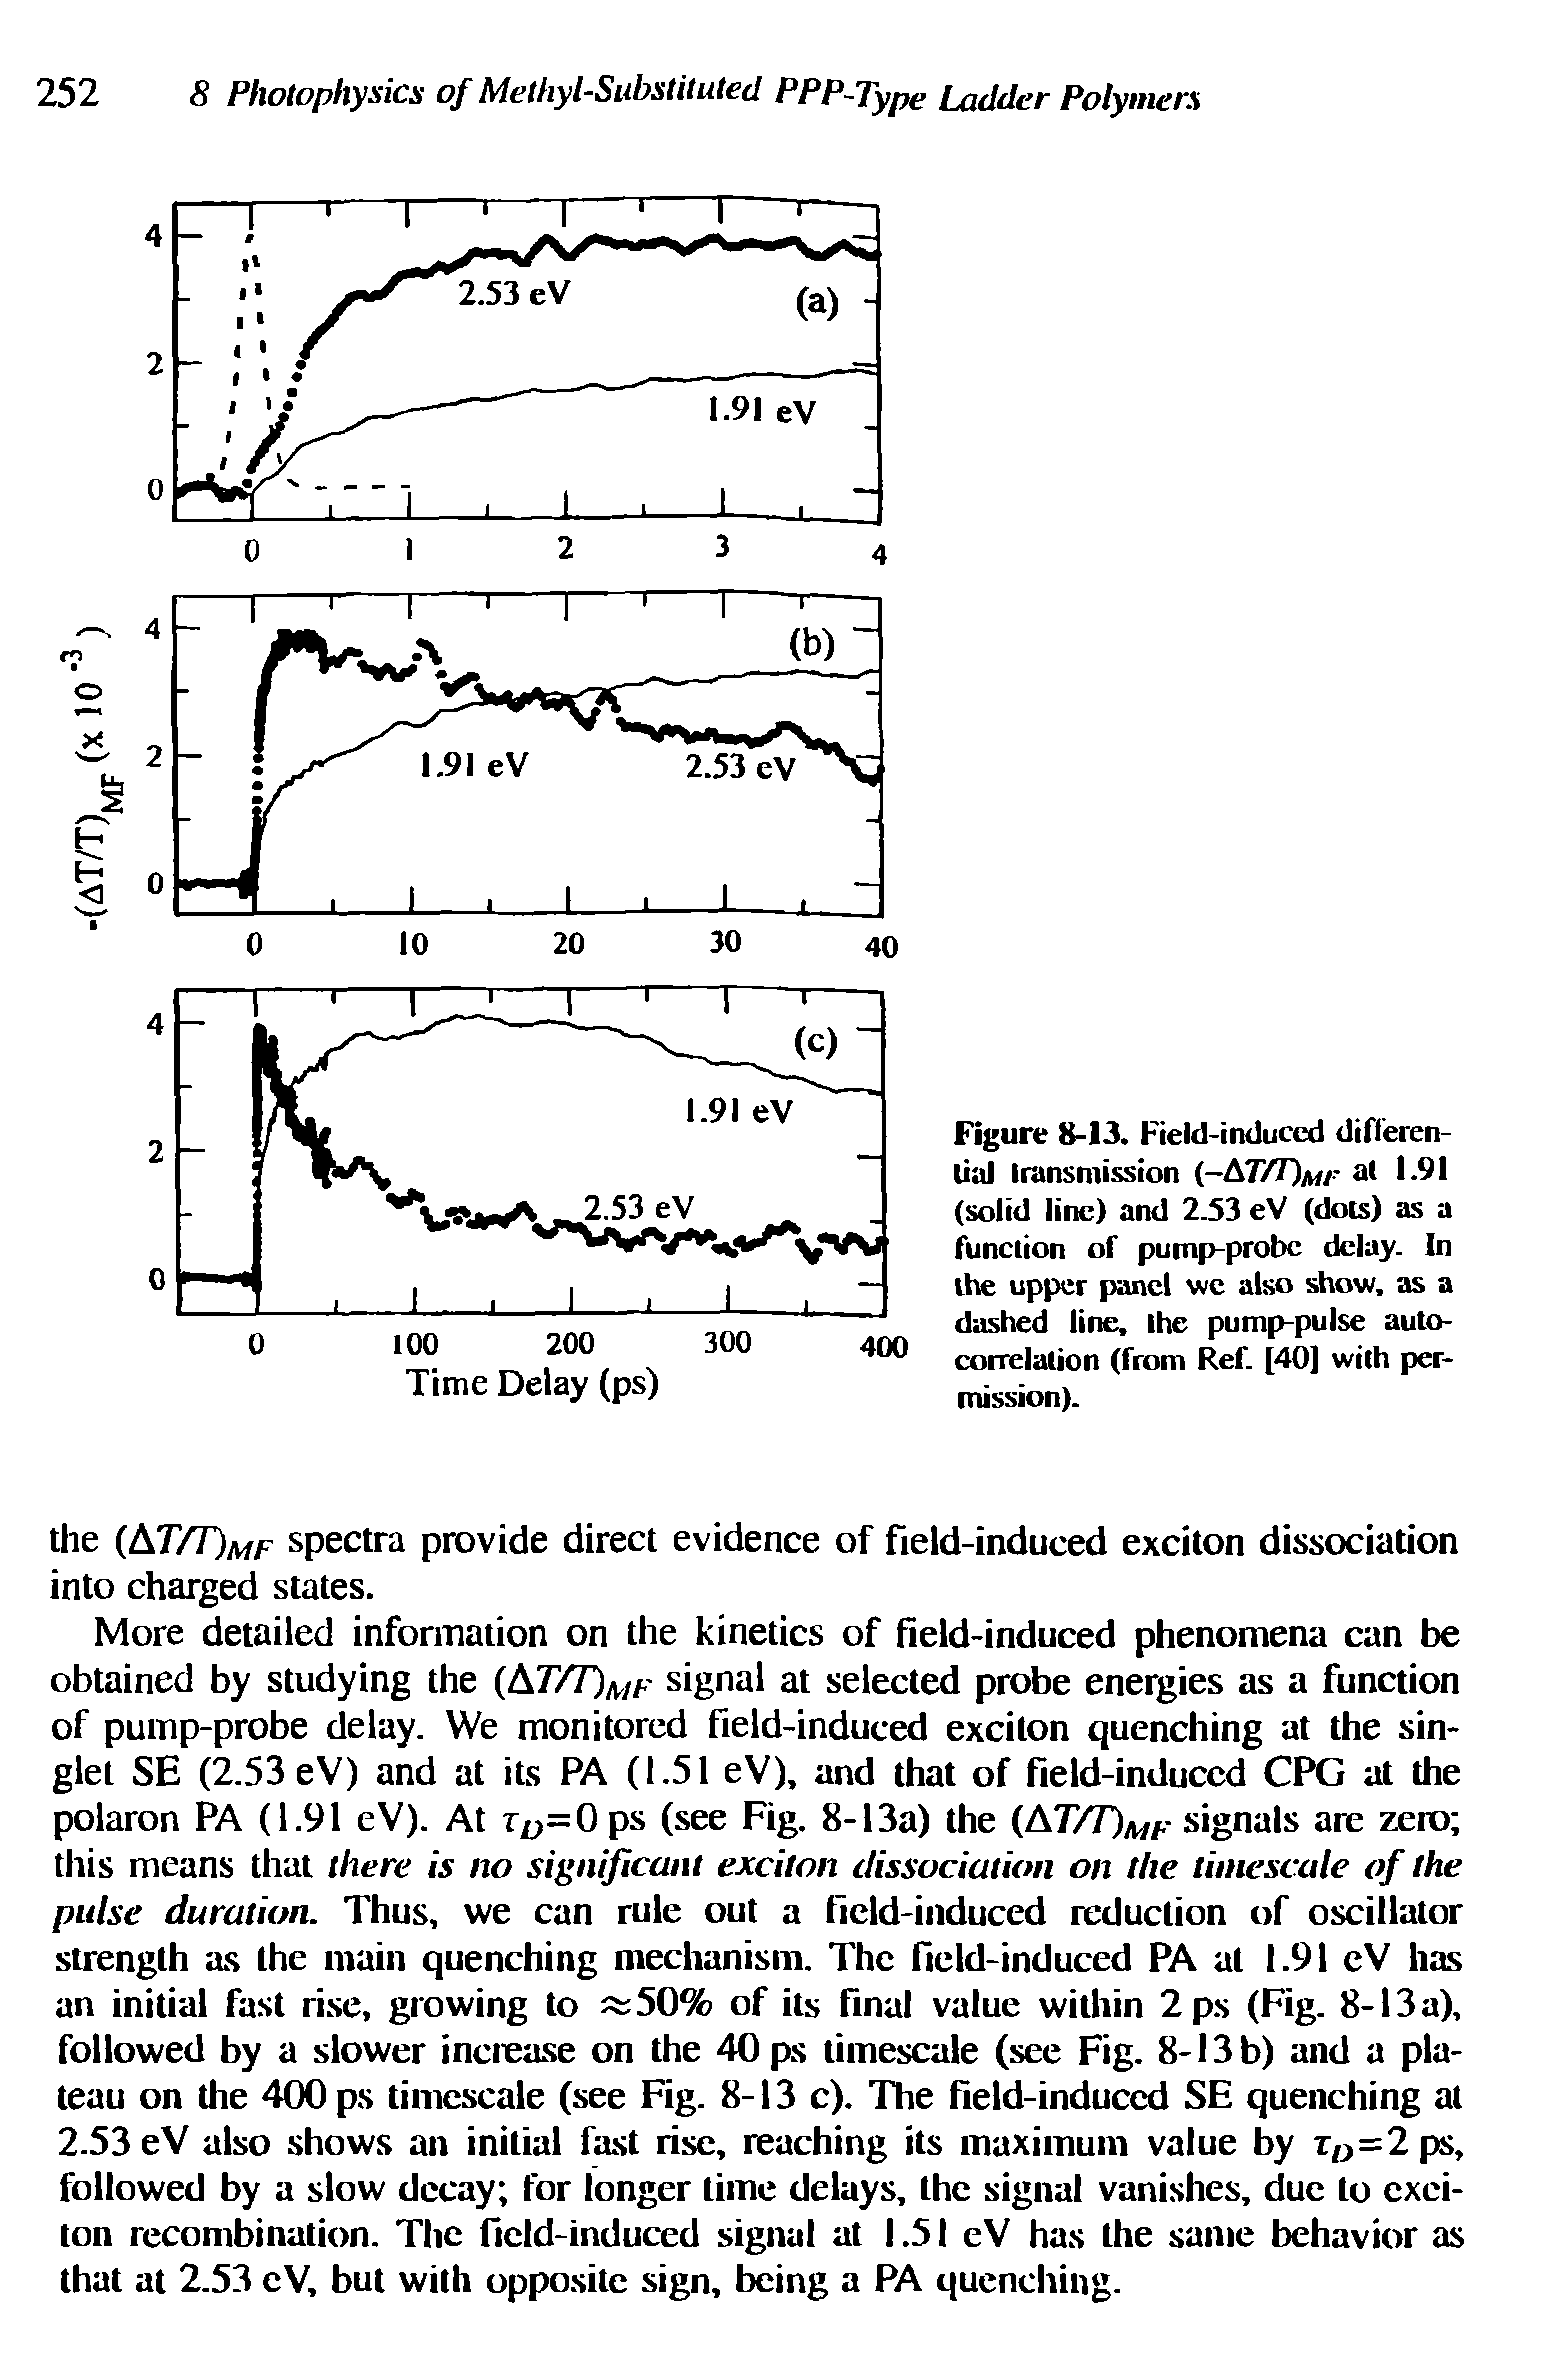 Figure 8-13. Field-induced differential transmission (-A7ZT)a - a 1-91 (solid line) and 2.53 eV (dots) as a function of pump-probe delay. In the upper panel we also show, as a dashed line, the pump-pulse autocorrelation (from Ref. [40] with permission).